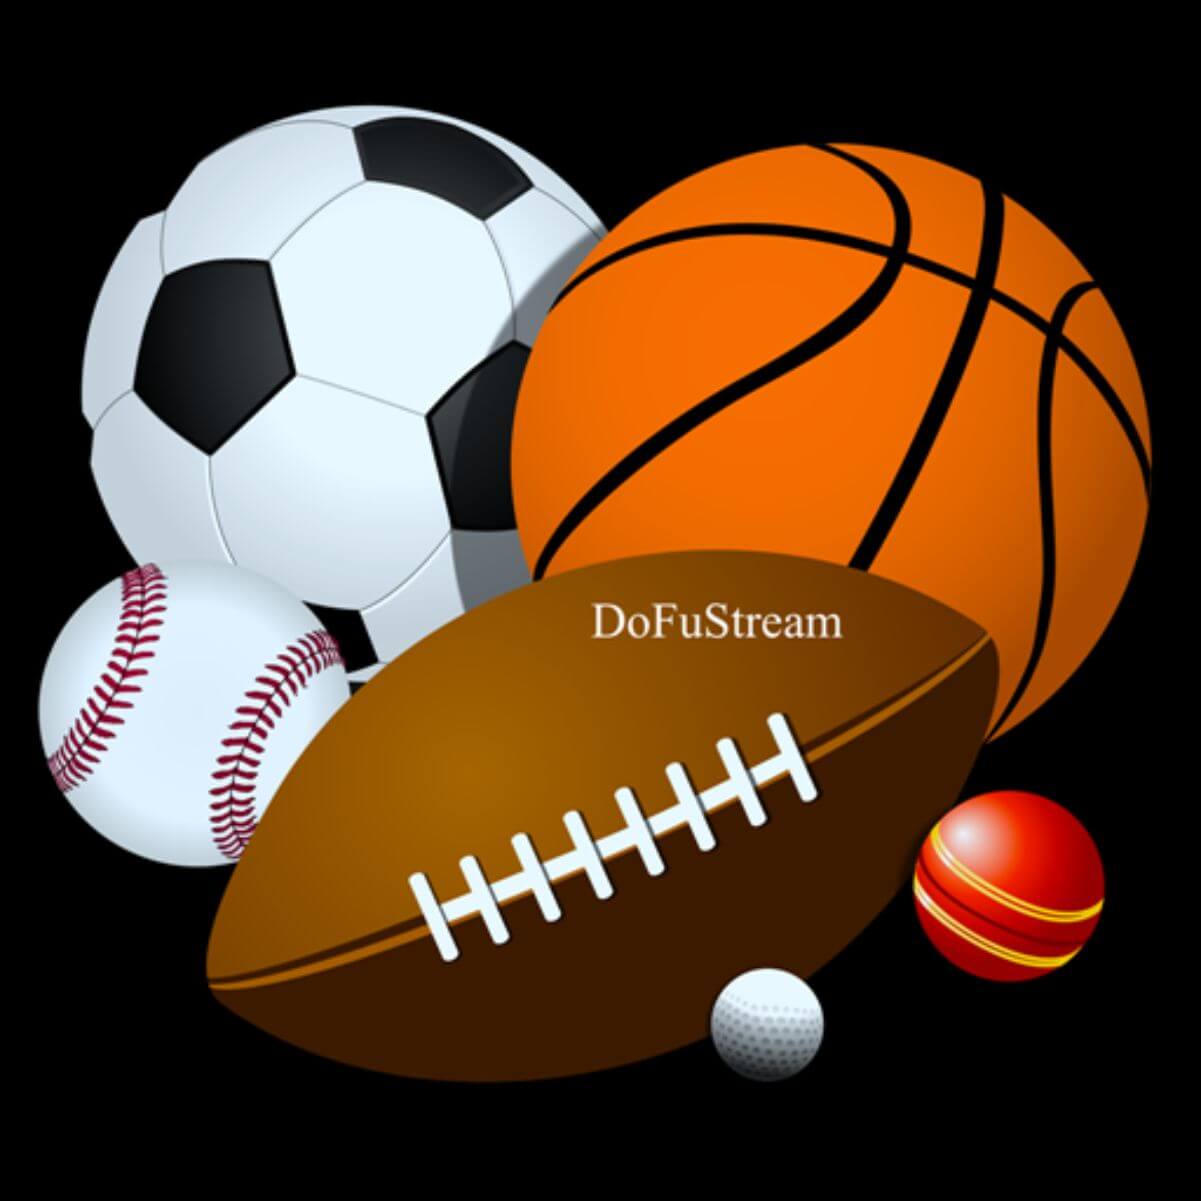 How to Install Dofu Sports on FireStick (NEW Updated APK)